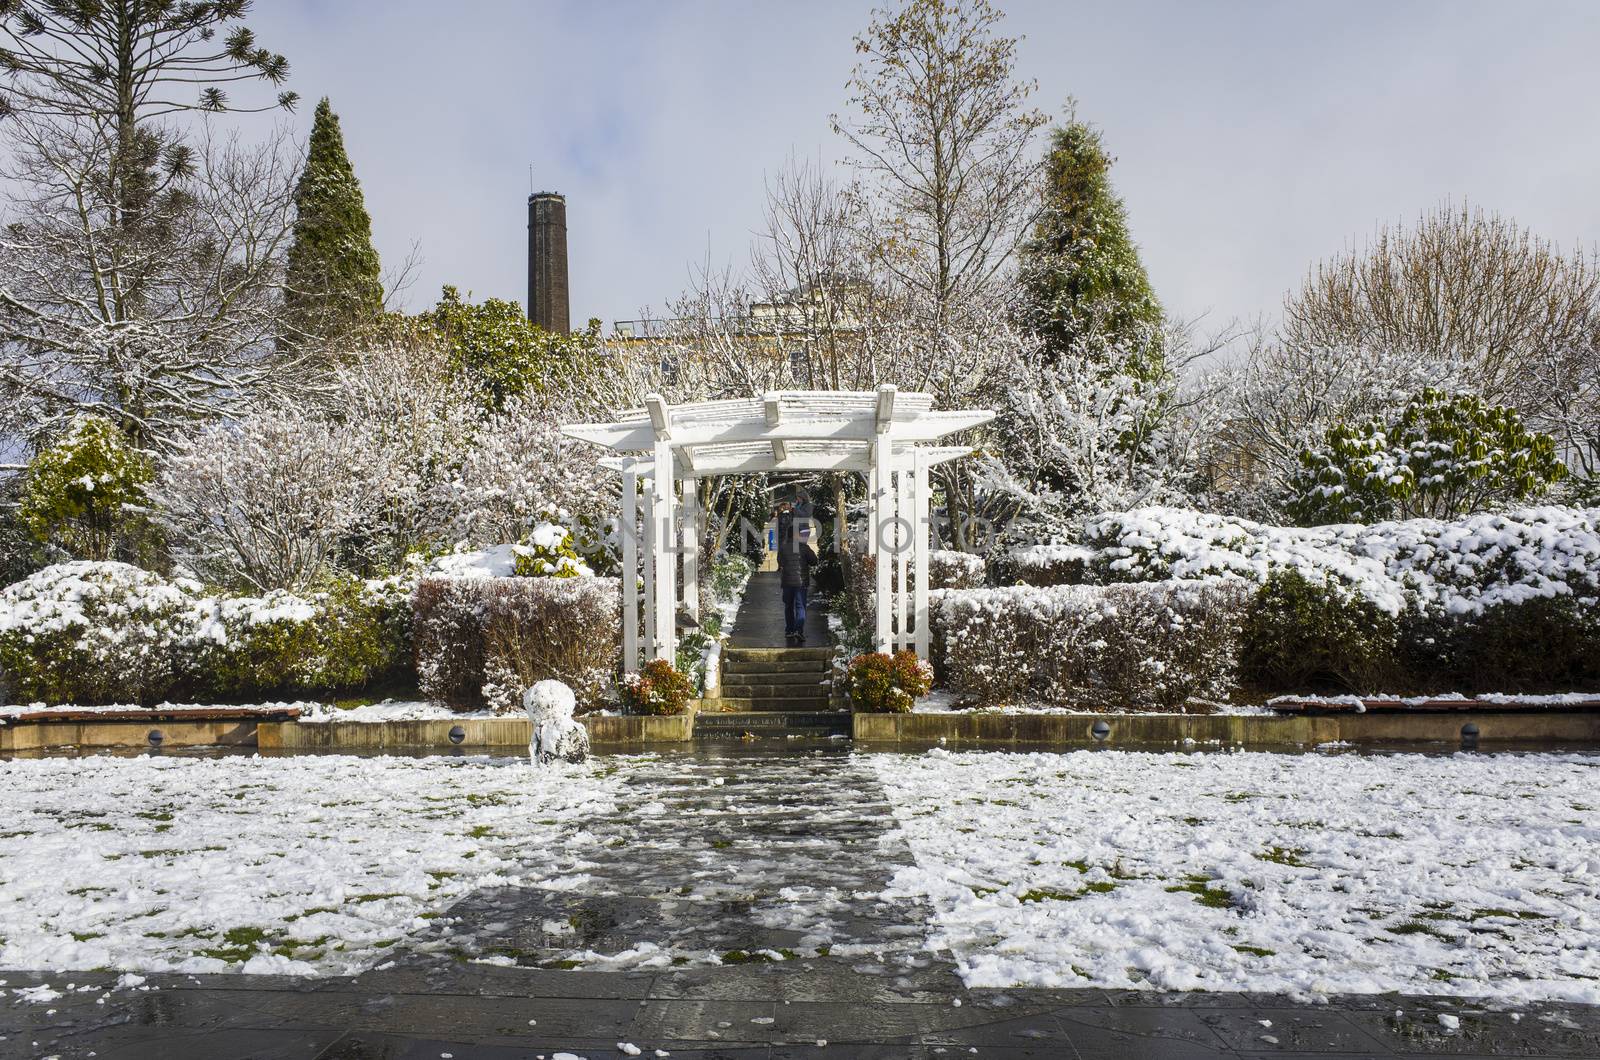 Katoomba, Blue Mountains, Australia, 10 August 2019: The snowy gardens at historic Carrington Hotel in Katoomba after a winter snowfall